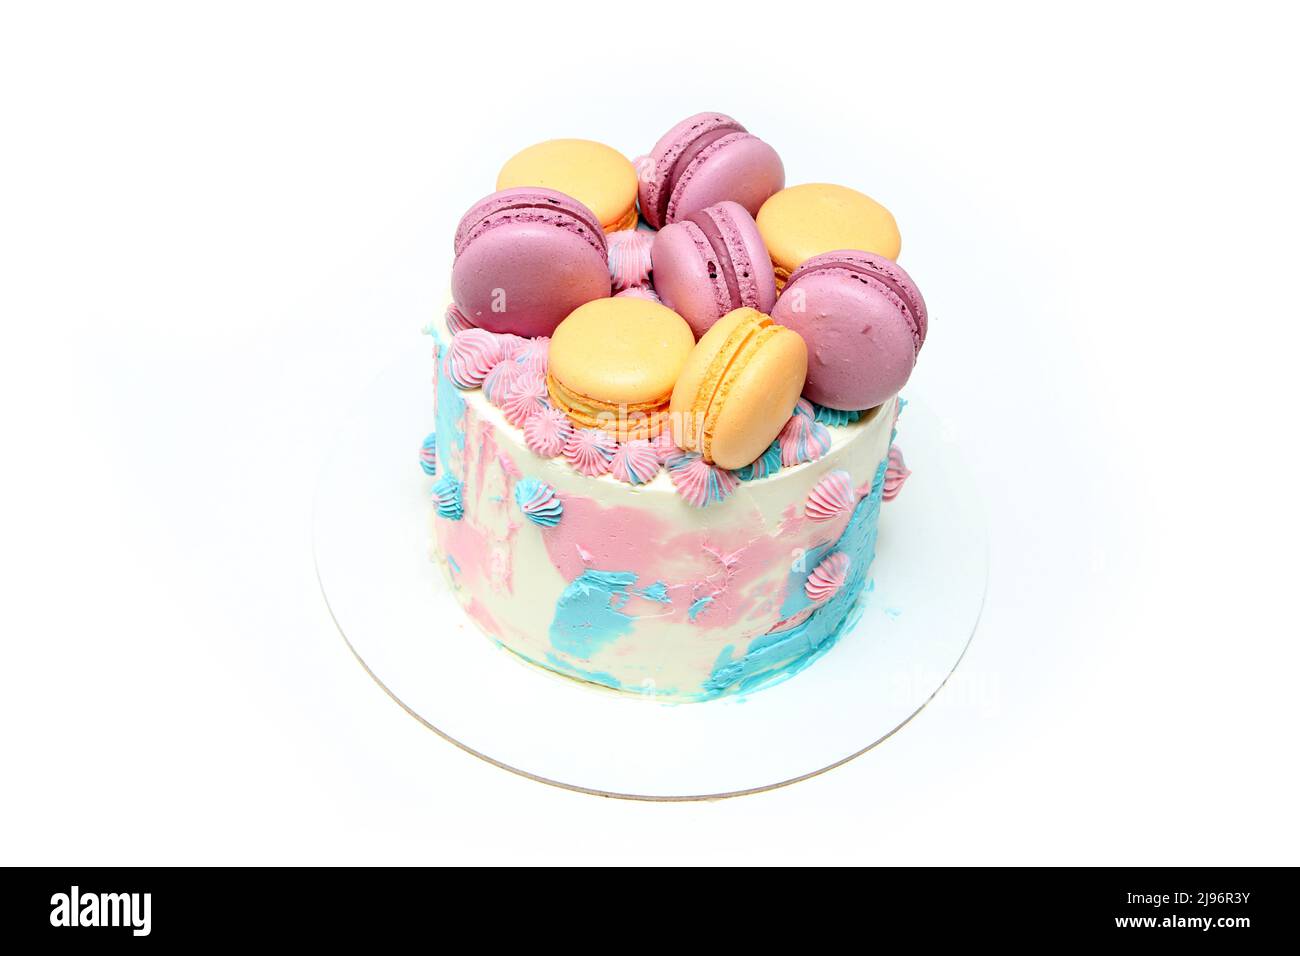 The small colorful and delicious cake with several macrons on it. Isolated on a white background. Stock Photo